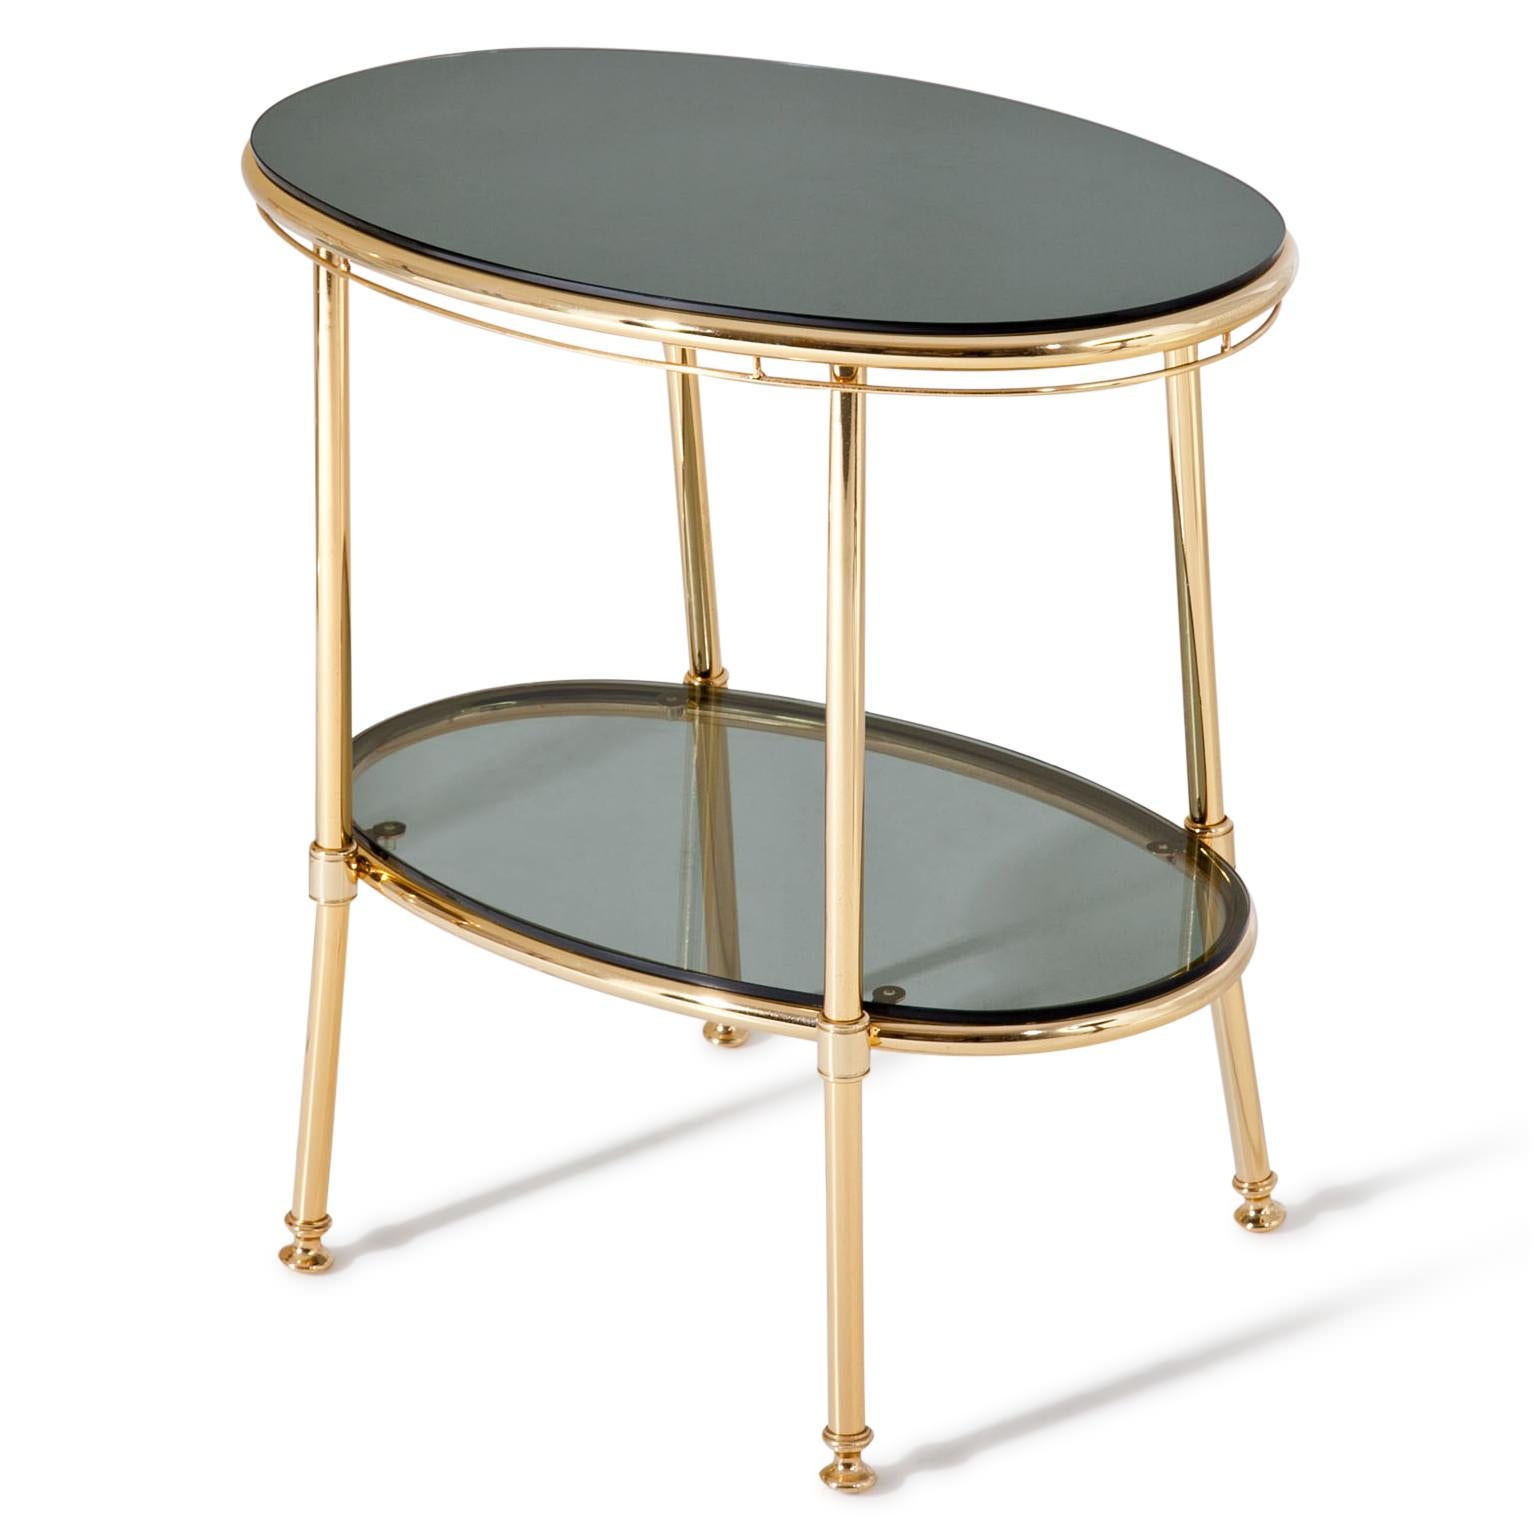 Pair of side tables or nightstands out of brass with an oval shape and two shelves out of dark glass. The top one is mirrored. Very nice quality.